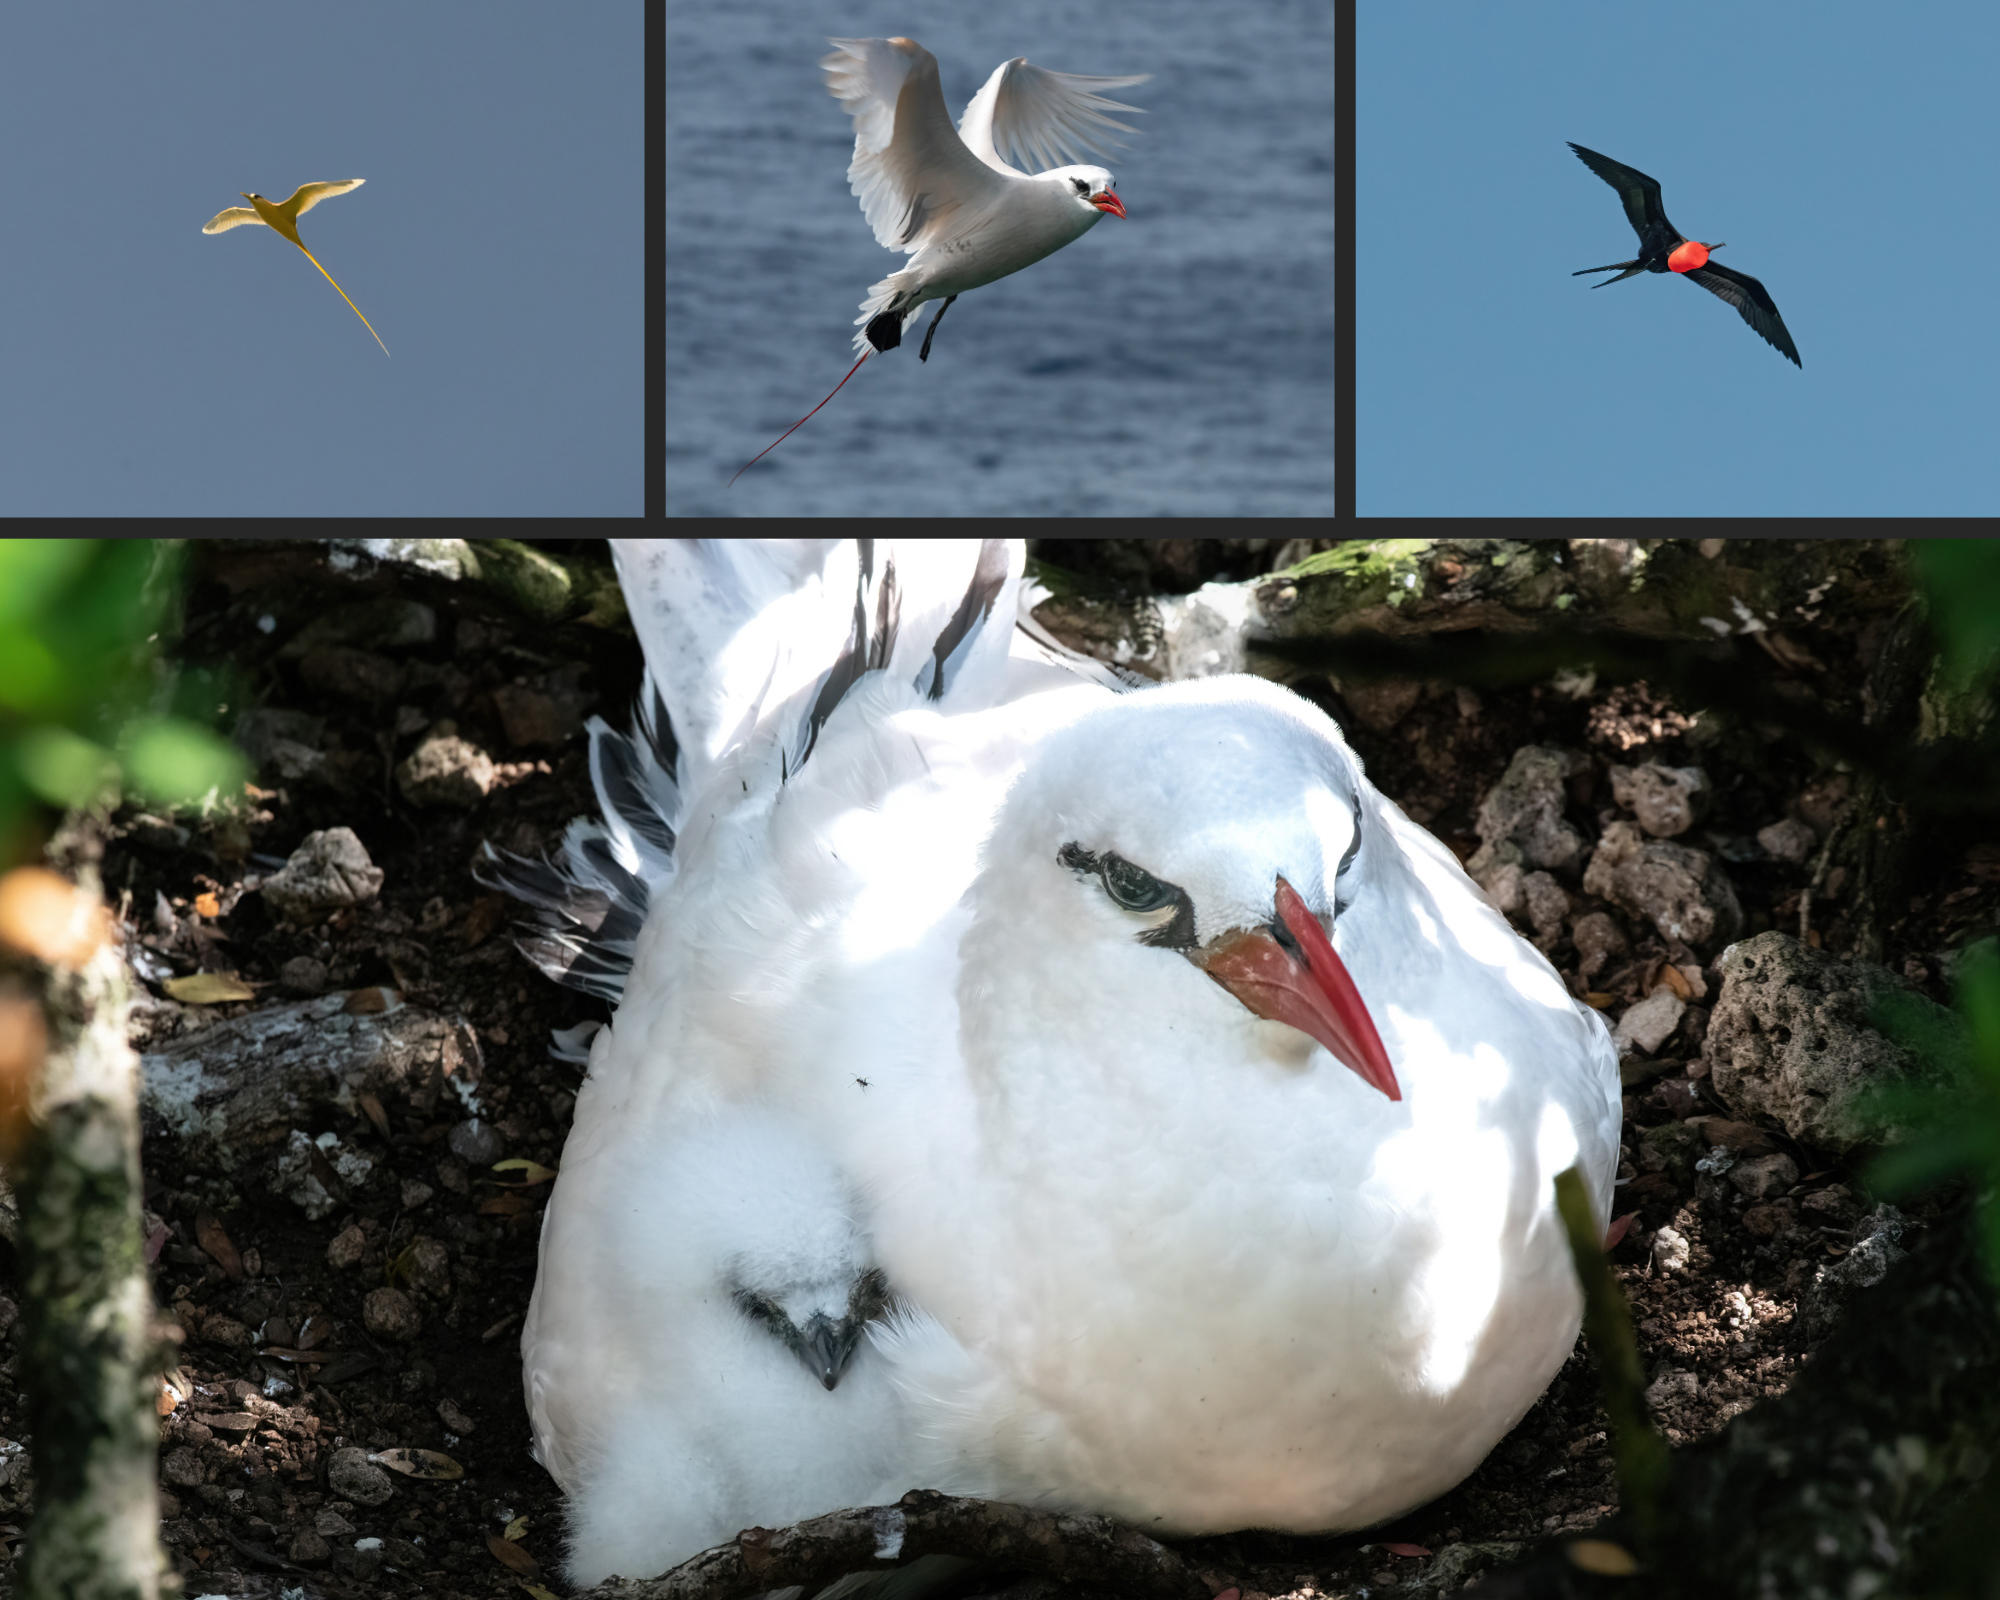 A photocollage of tropic birds in flight with a Christmas Island red throated frigate bird in flight, as well as a nesting silver bosun with its fluffy white chick